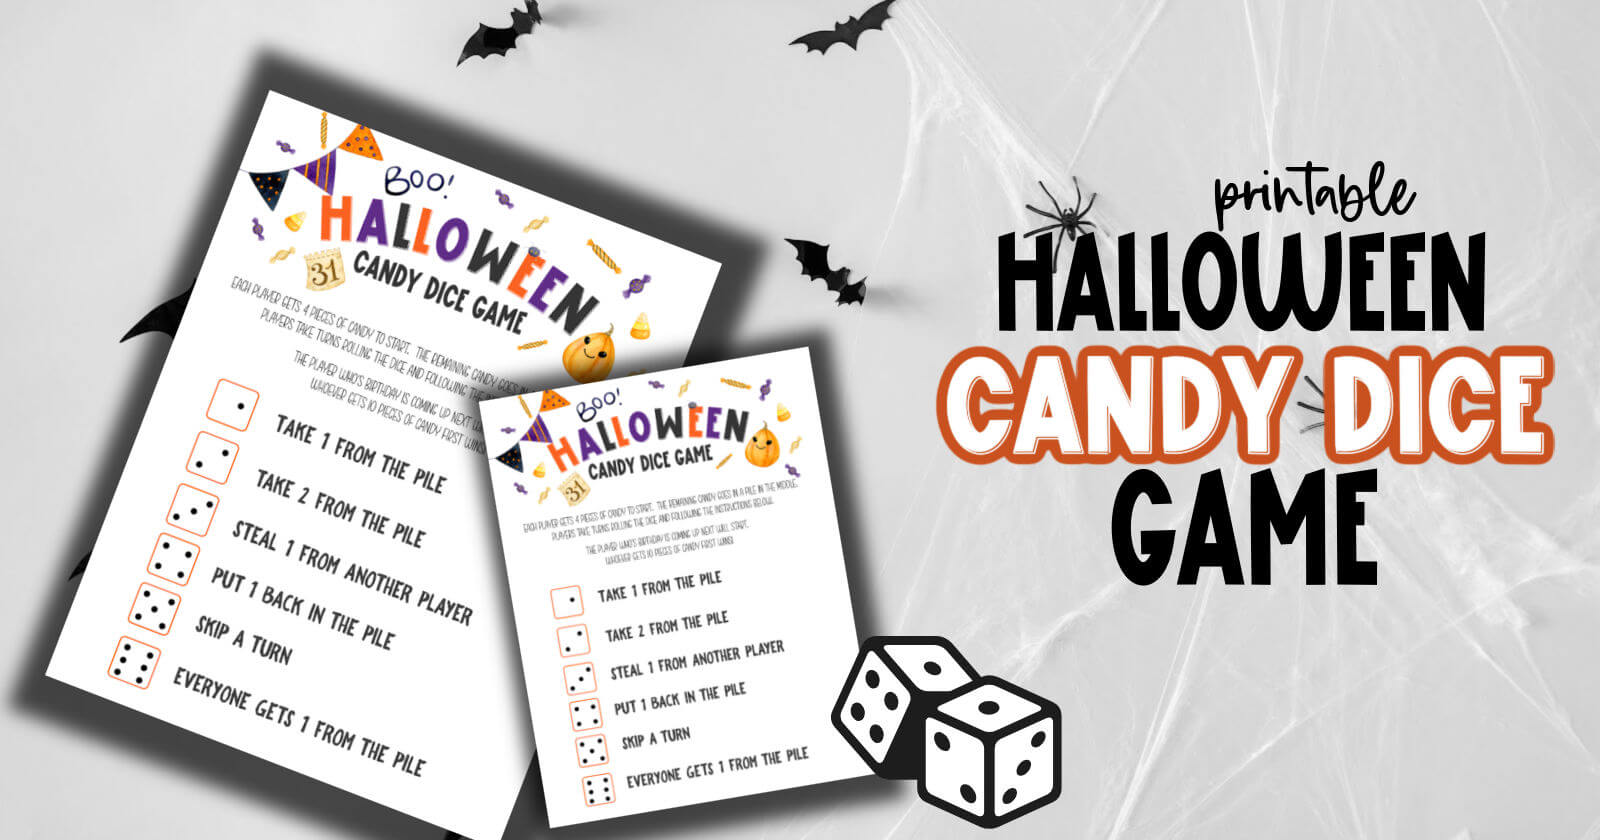 Halloween printable candy bowl dice game with bats and cobwebs in background